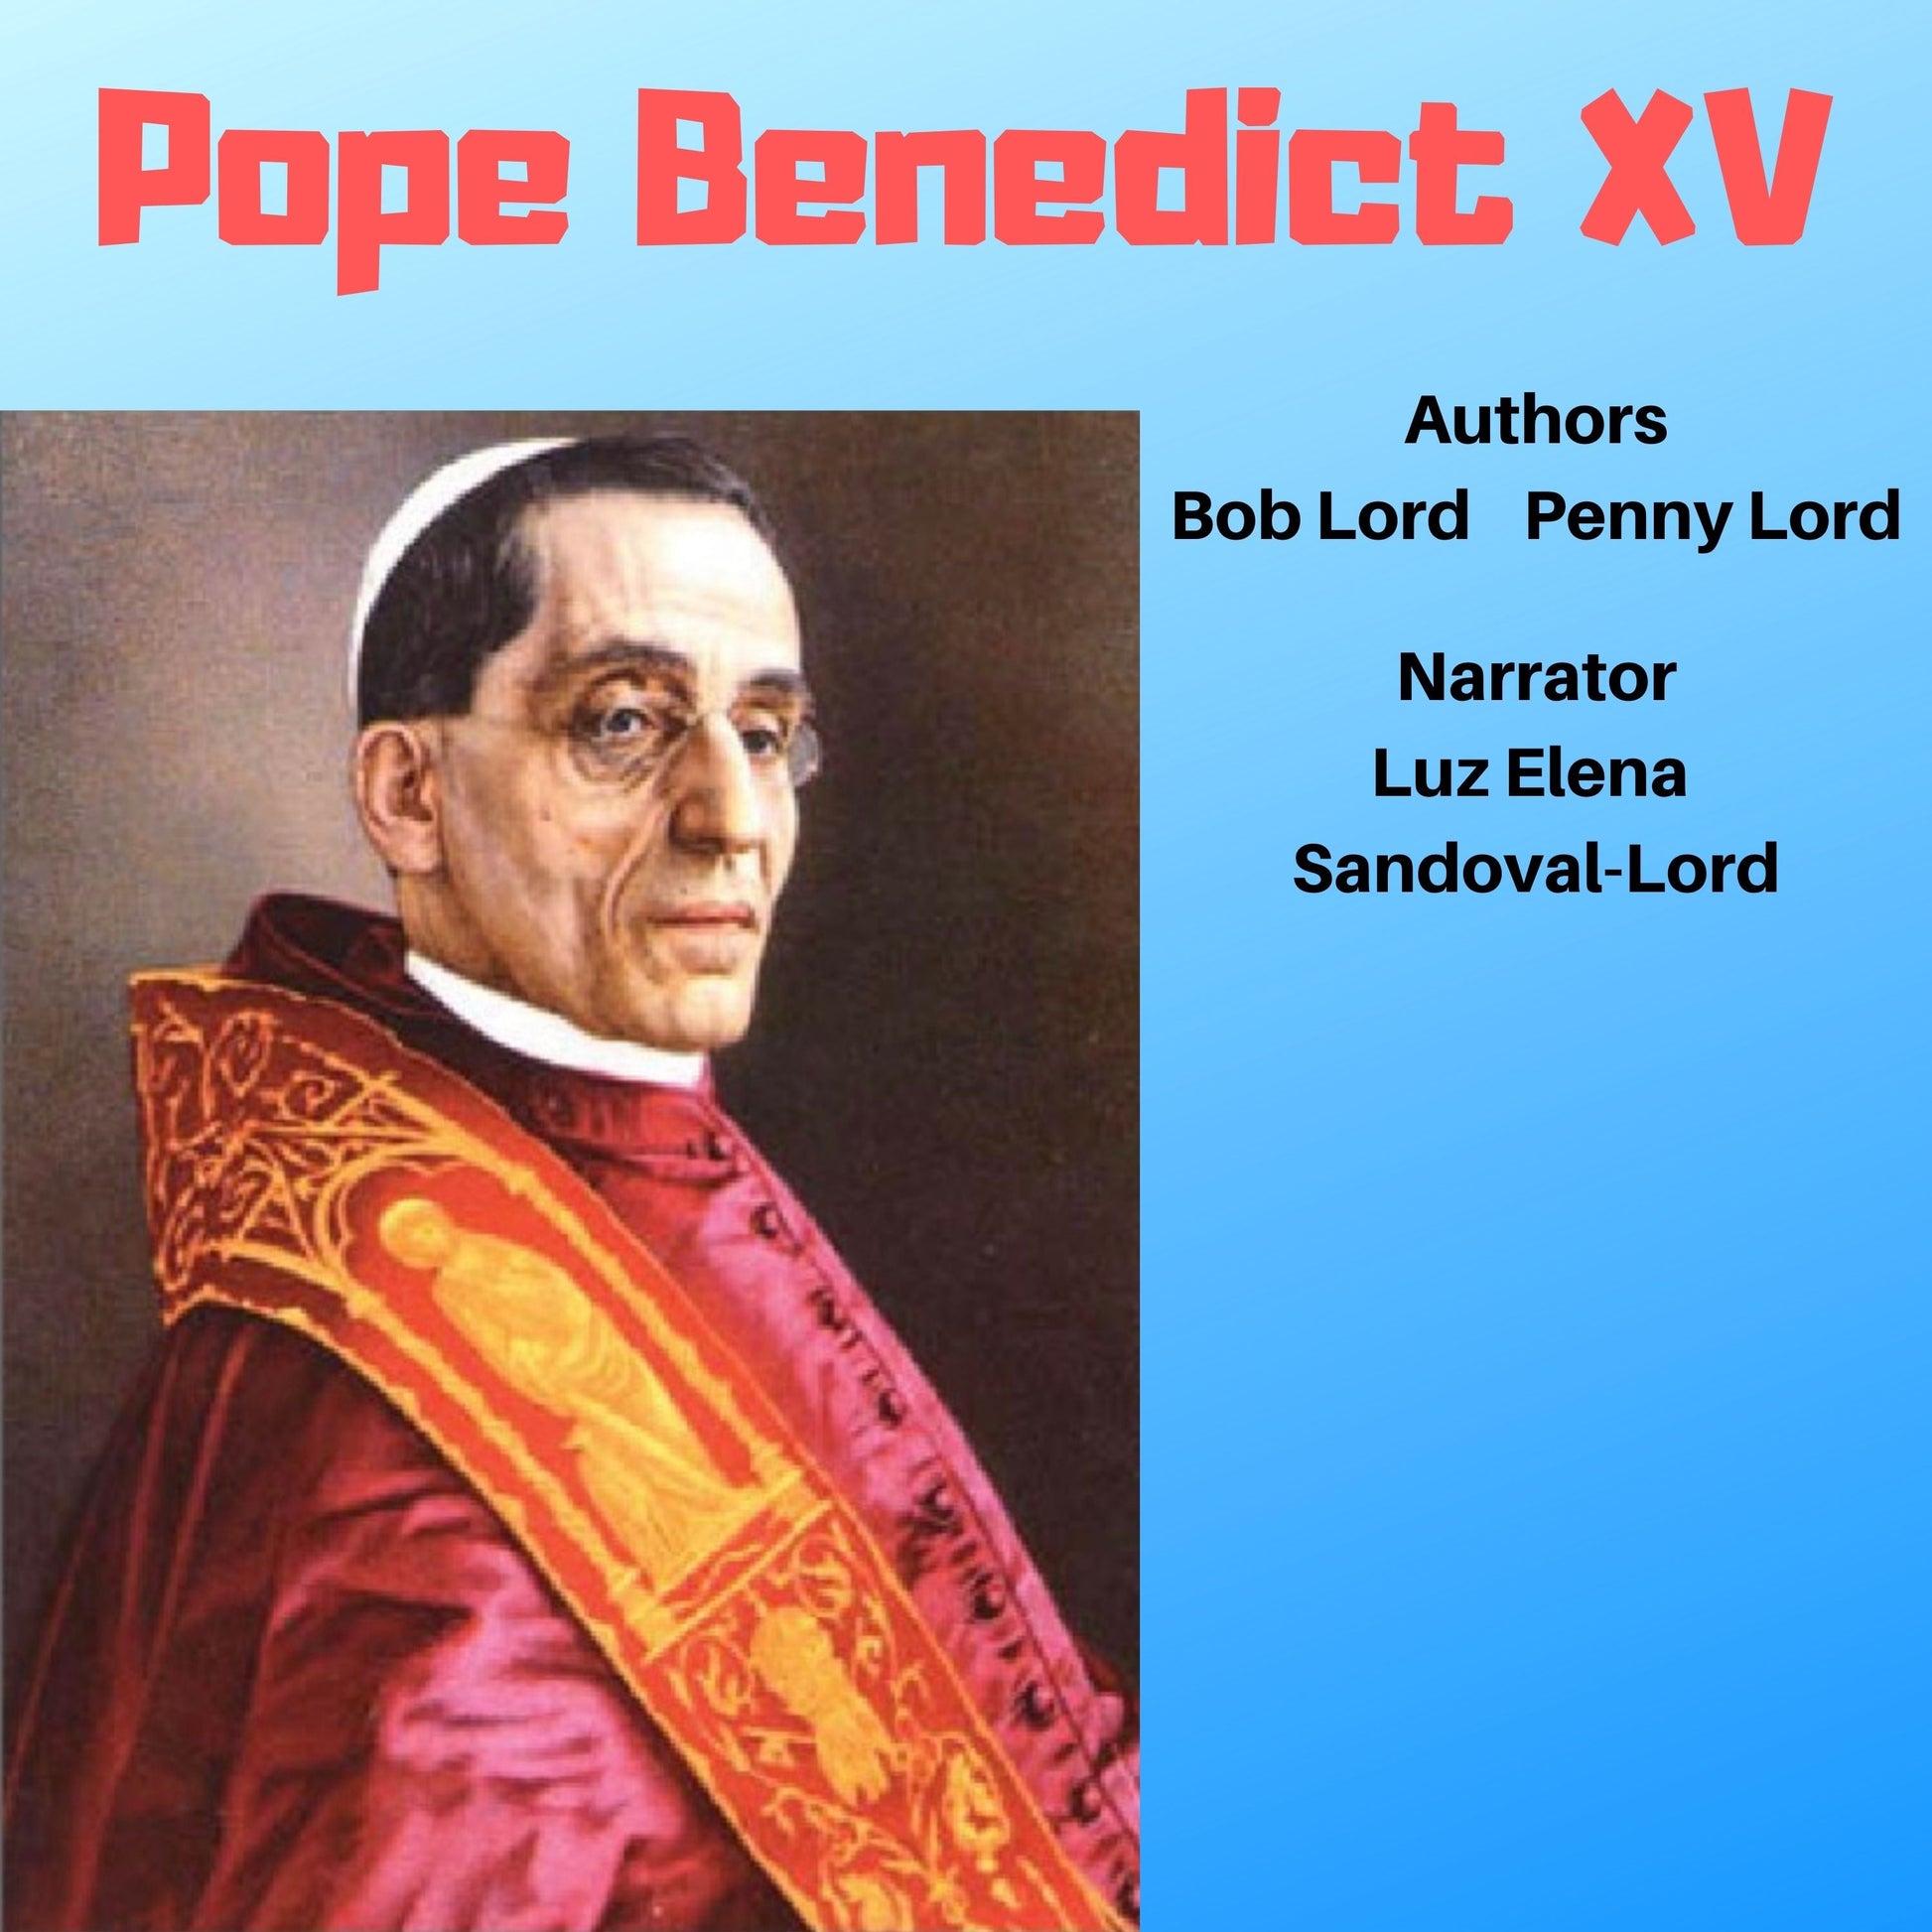 Heroes Popes in Hard Times ebook PDF - Bob and Penny Lord